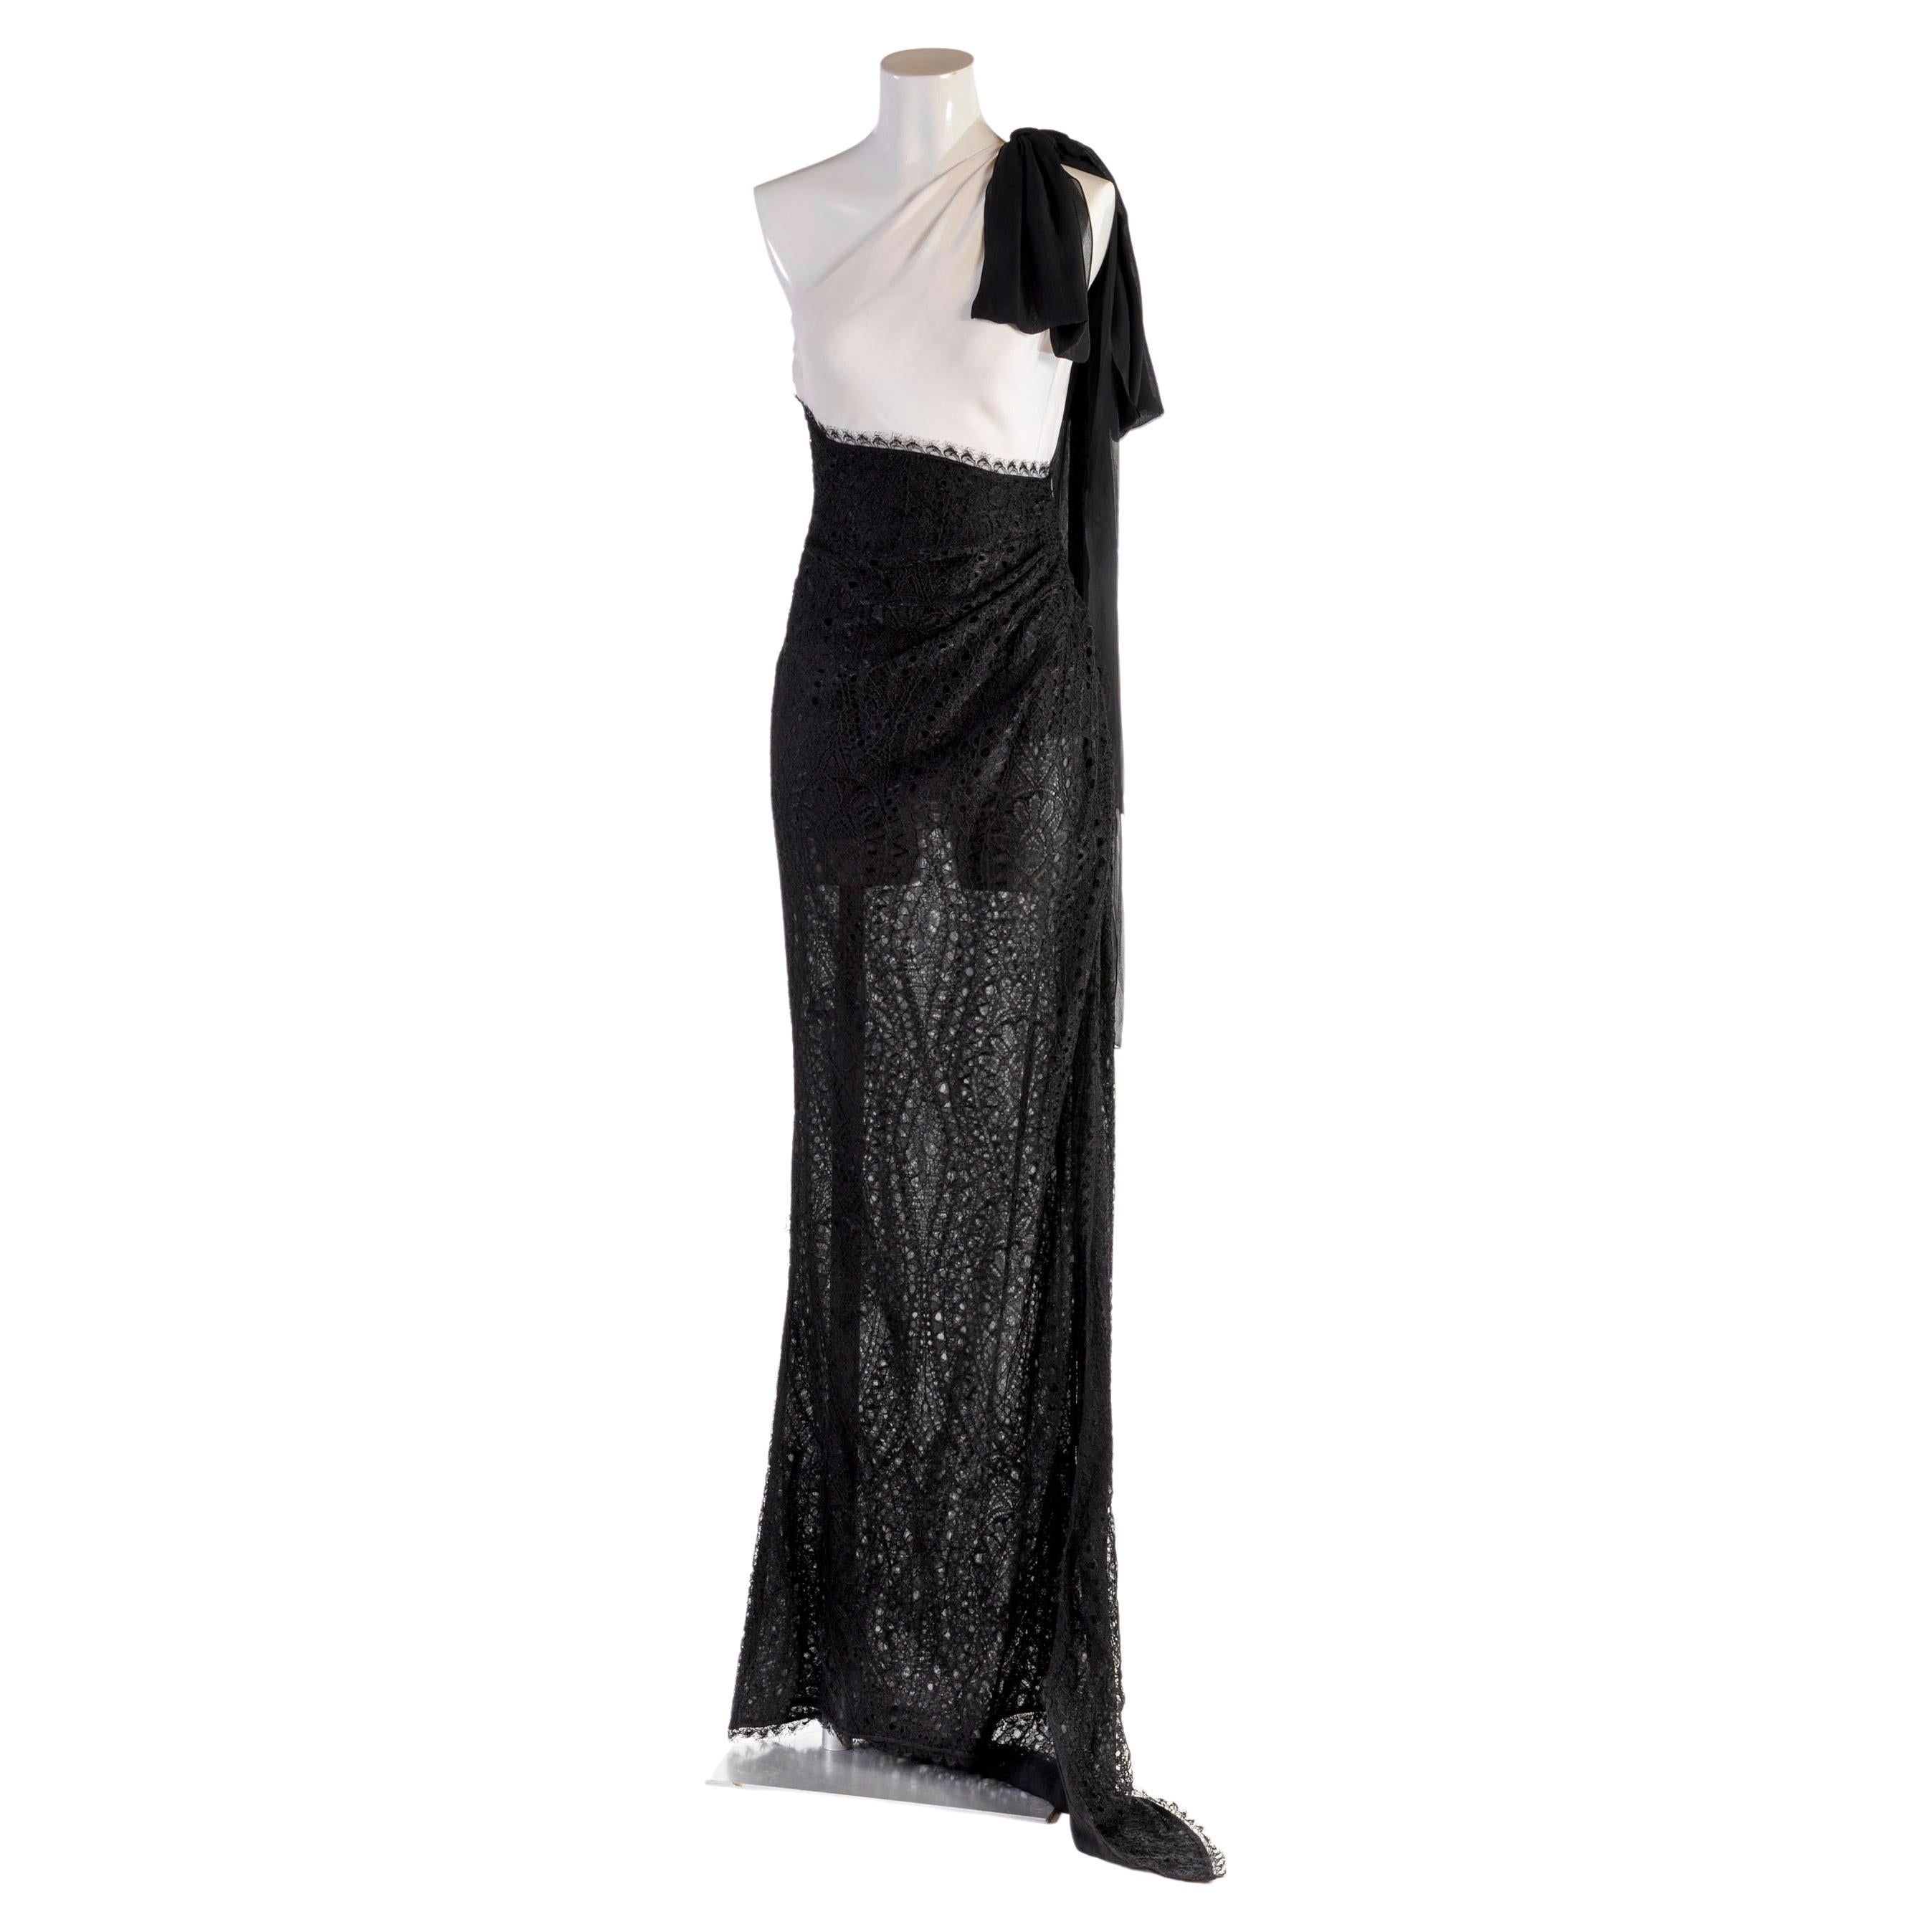 EMILIO PUCCI
Long one-shoulder dress in white silk and black lace with short tail
Deep left side slit
Black bow in silk on the left shoulder
Draping on the hips
Side zip
Size IT 42
Made in Italy
Fabric:
47% silk
40% rayon
13% polyamide
Lace:
55%